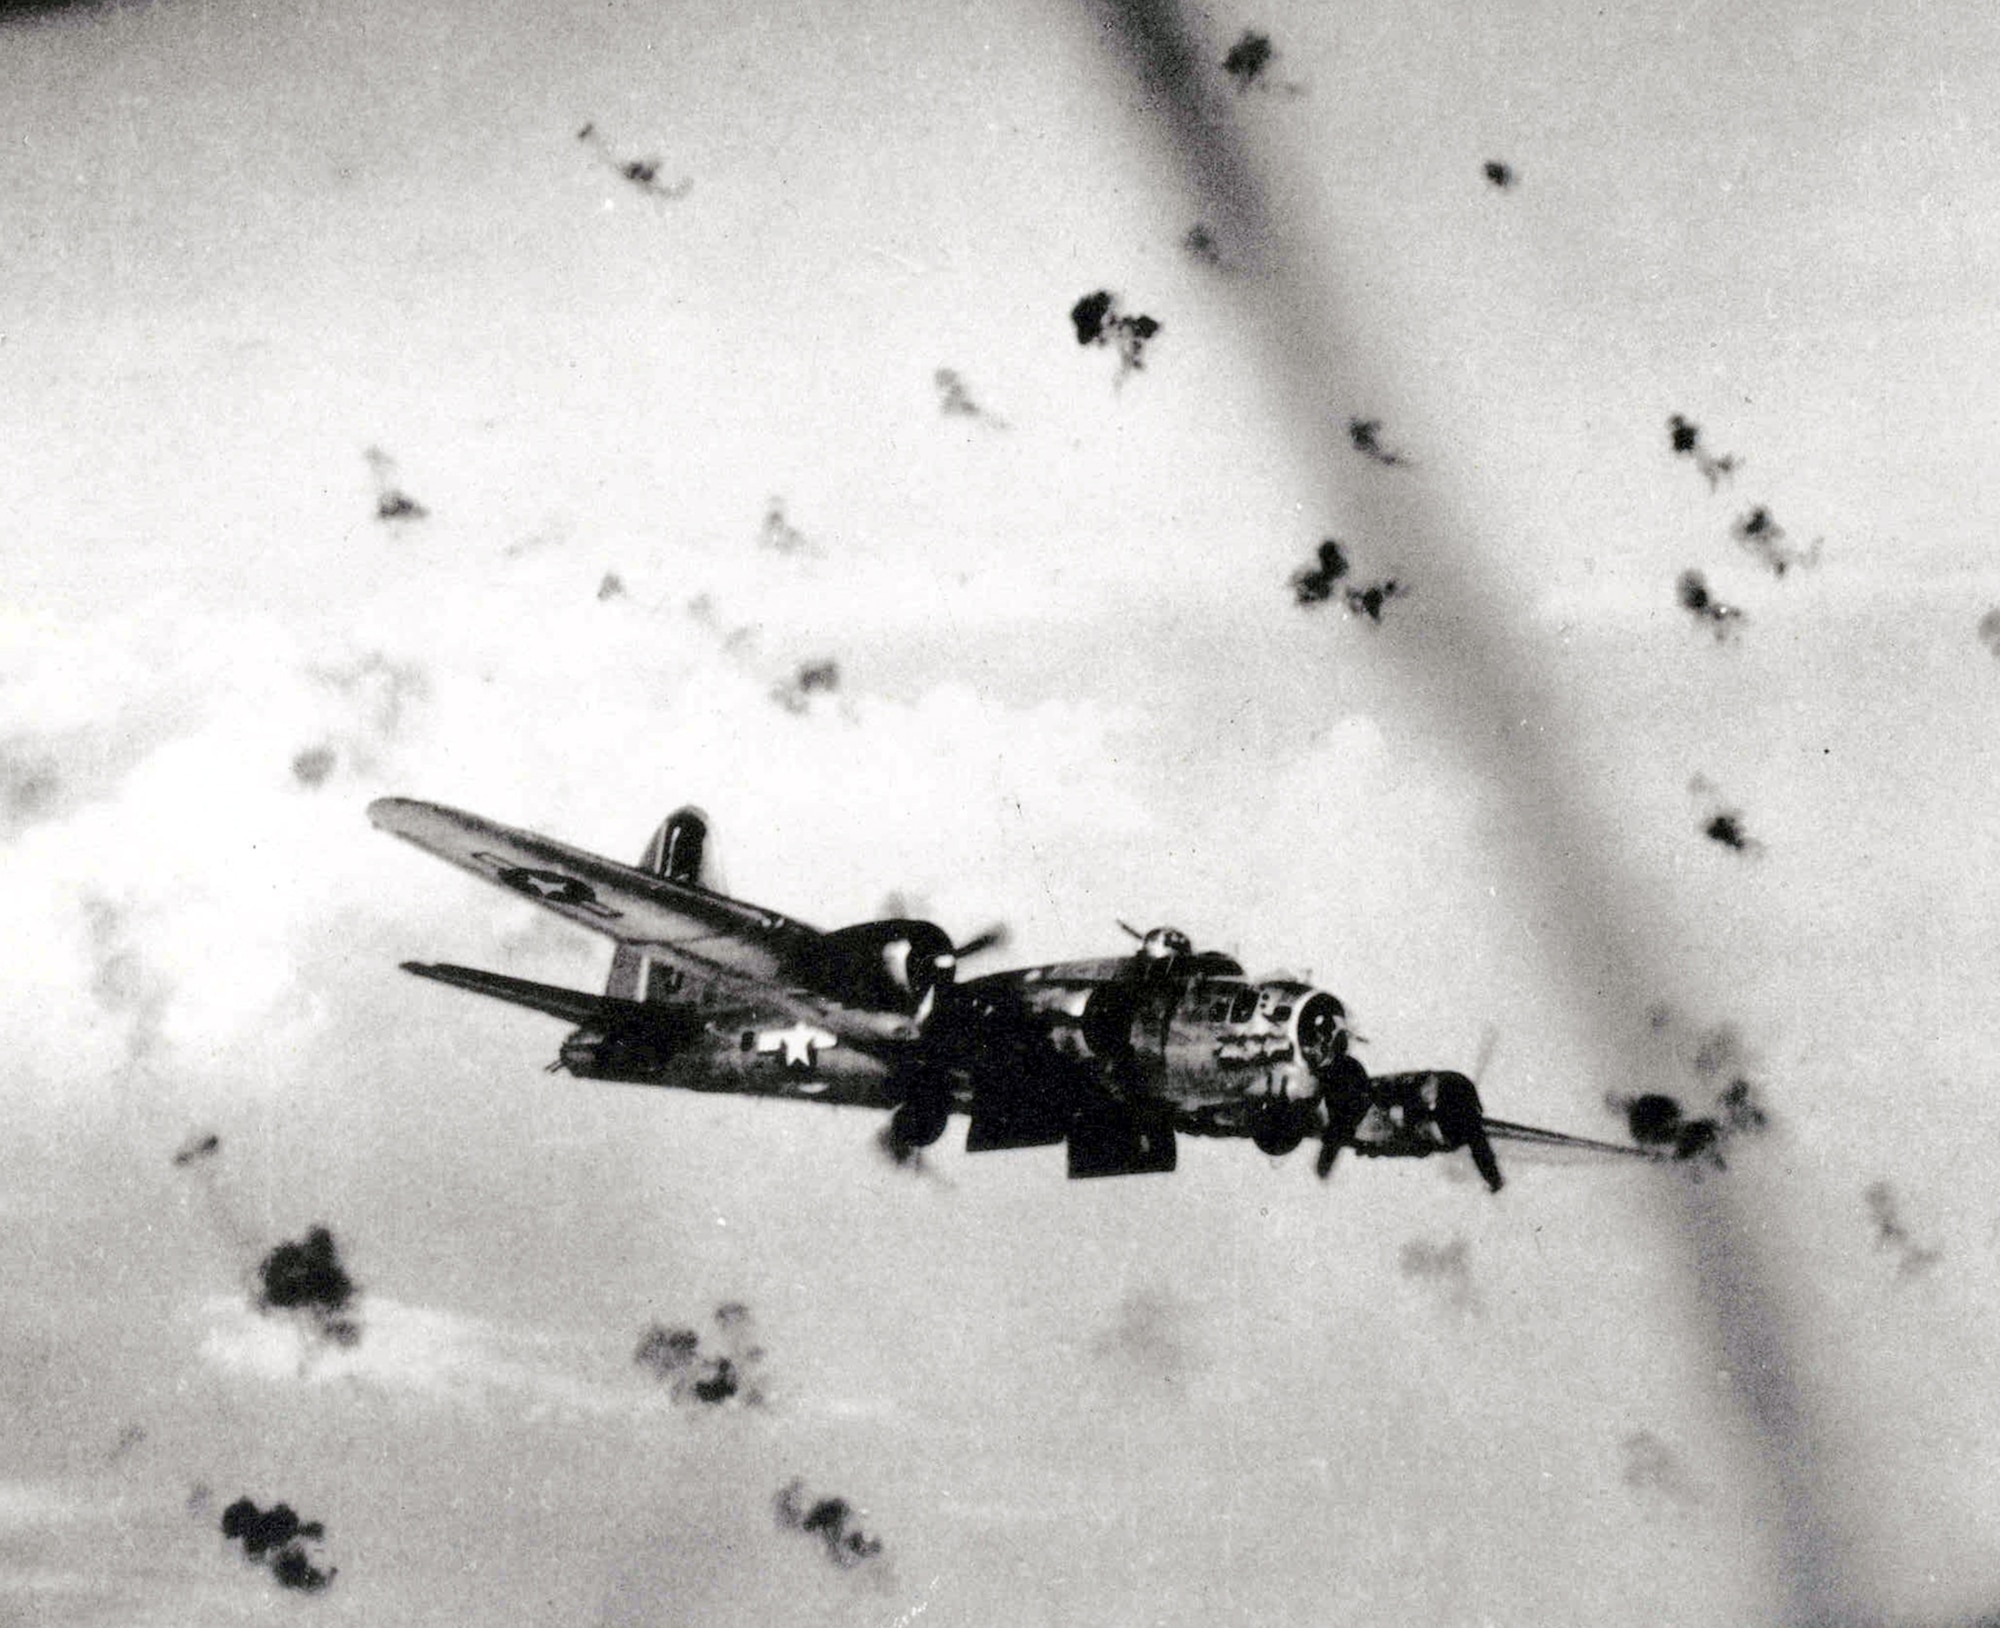 B-17s fly through flak on their way to a target. (U.S. Air Force photo)